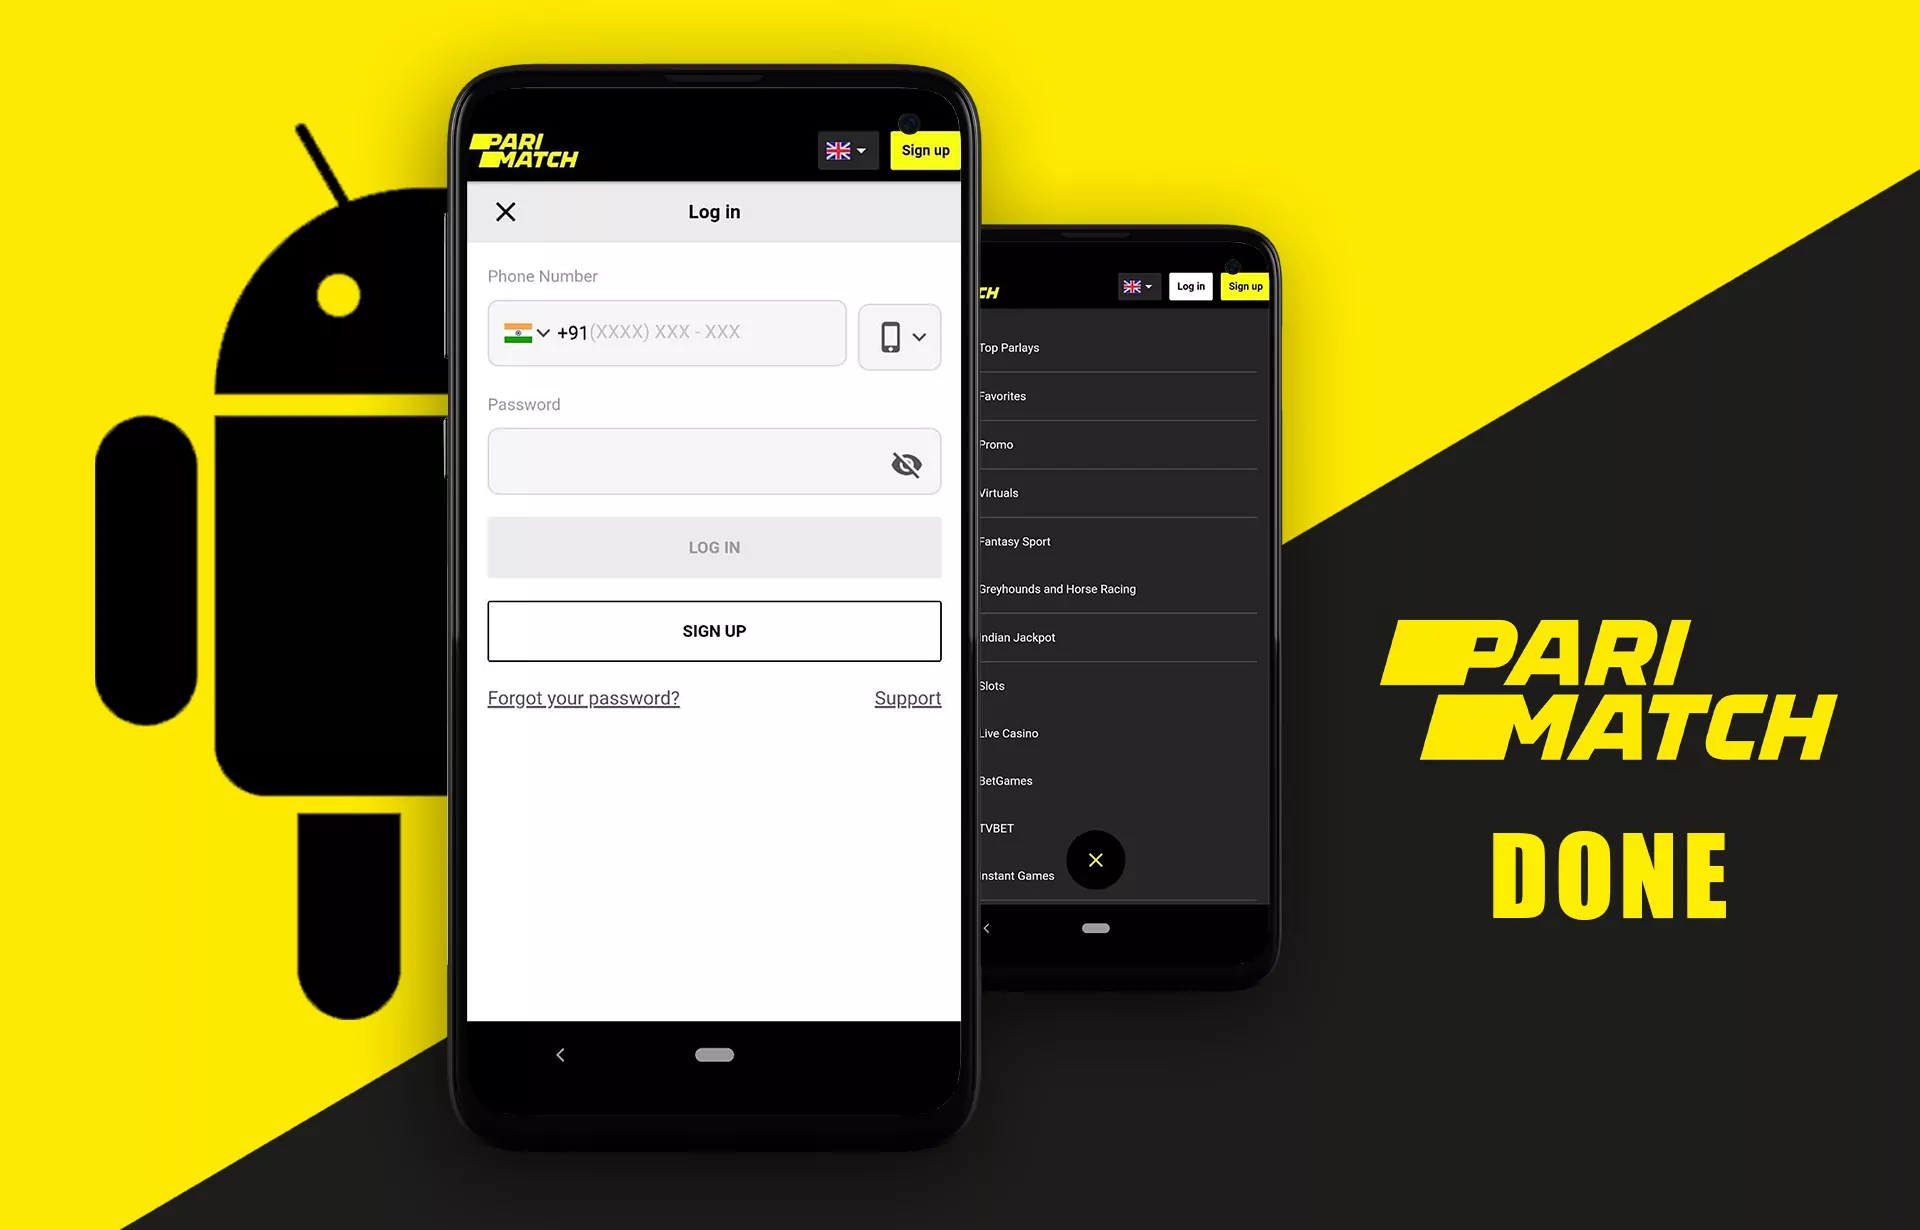 Run the app and create an account on Parimatch or log in if you already have it.